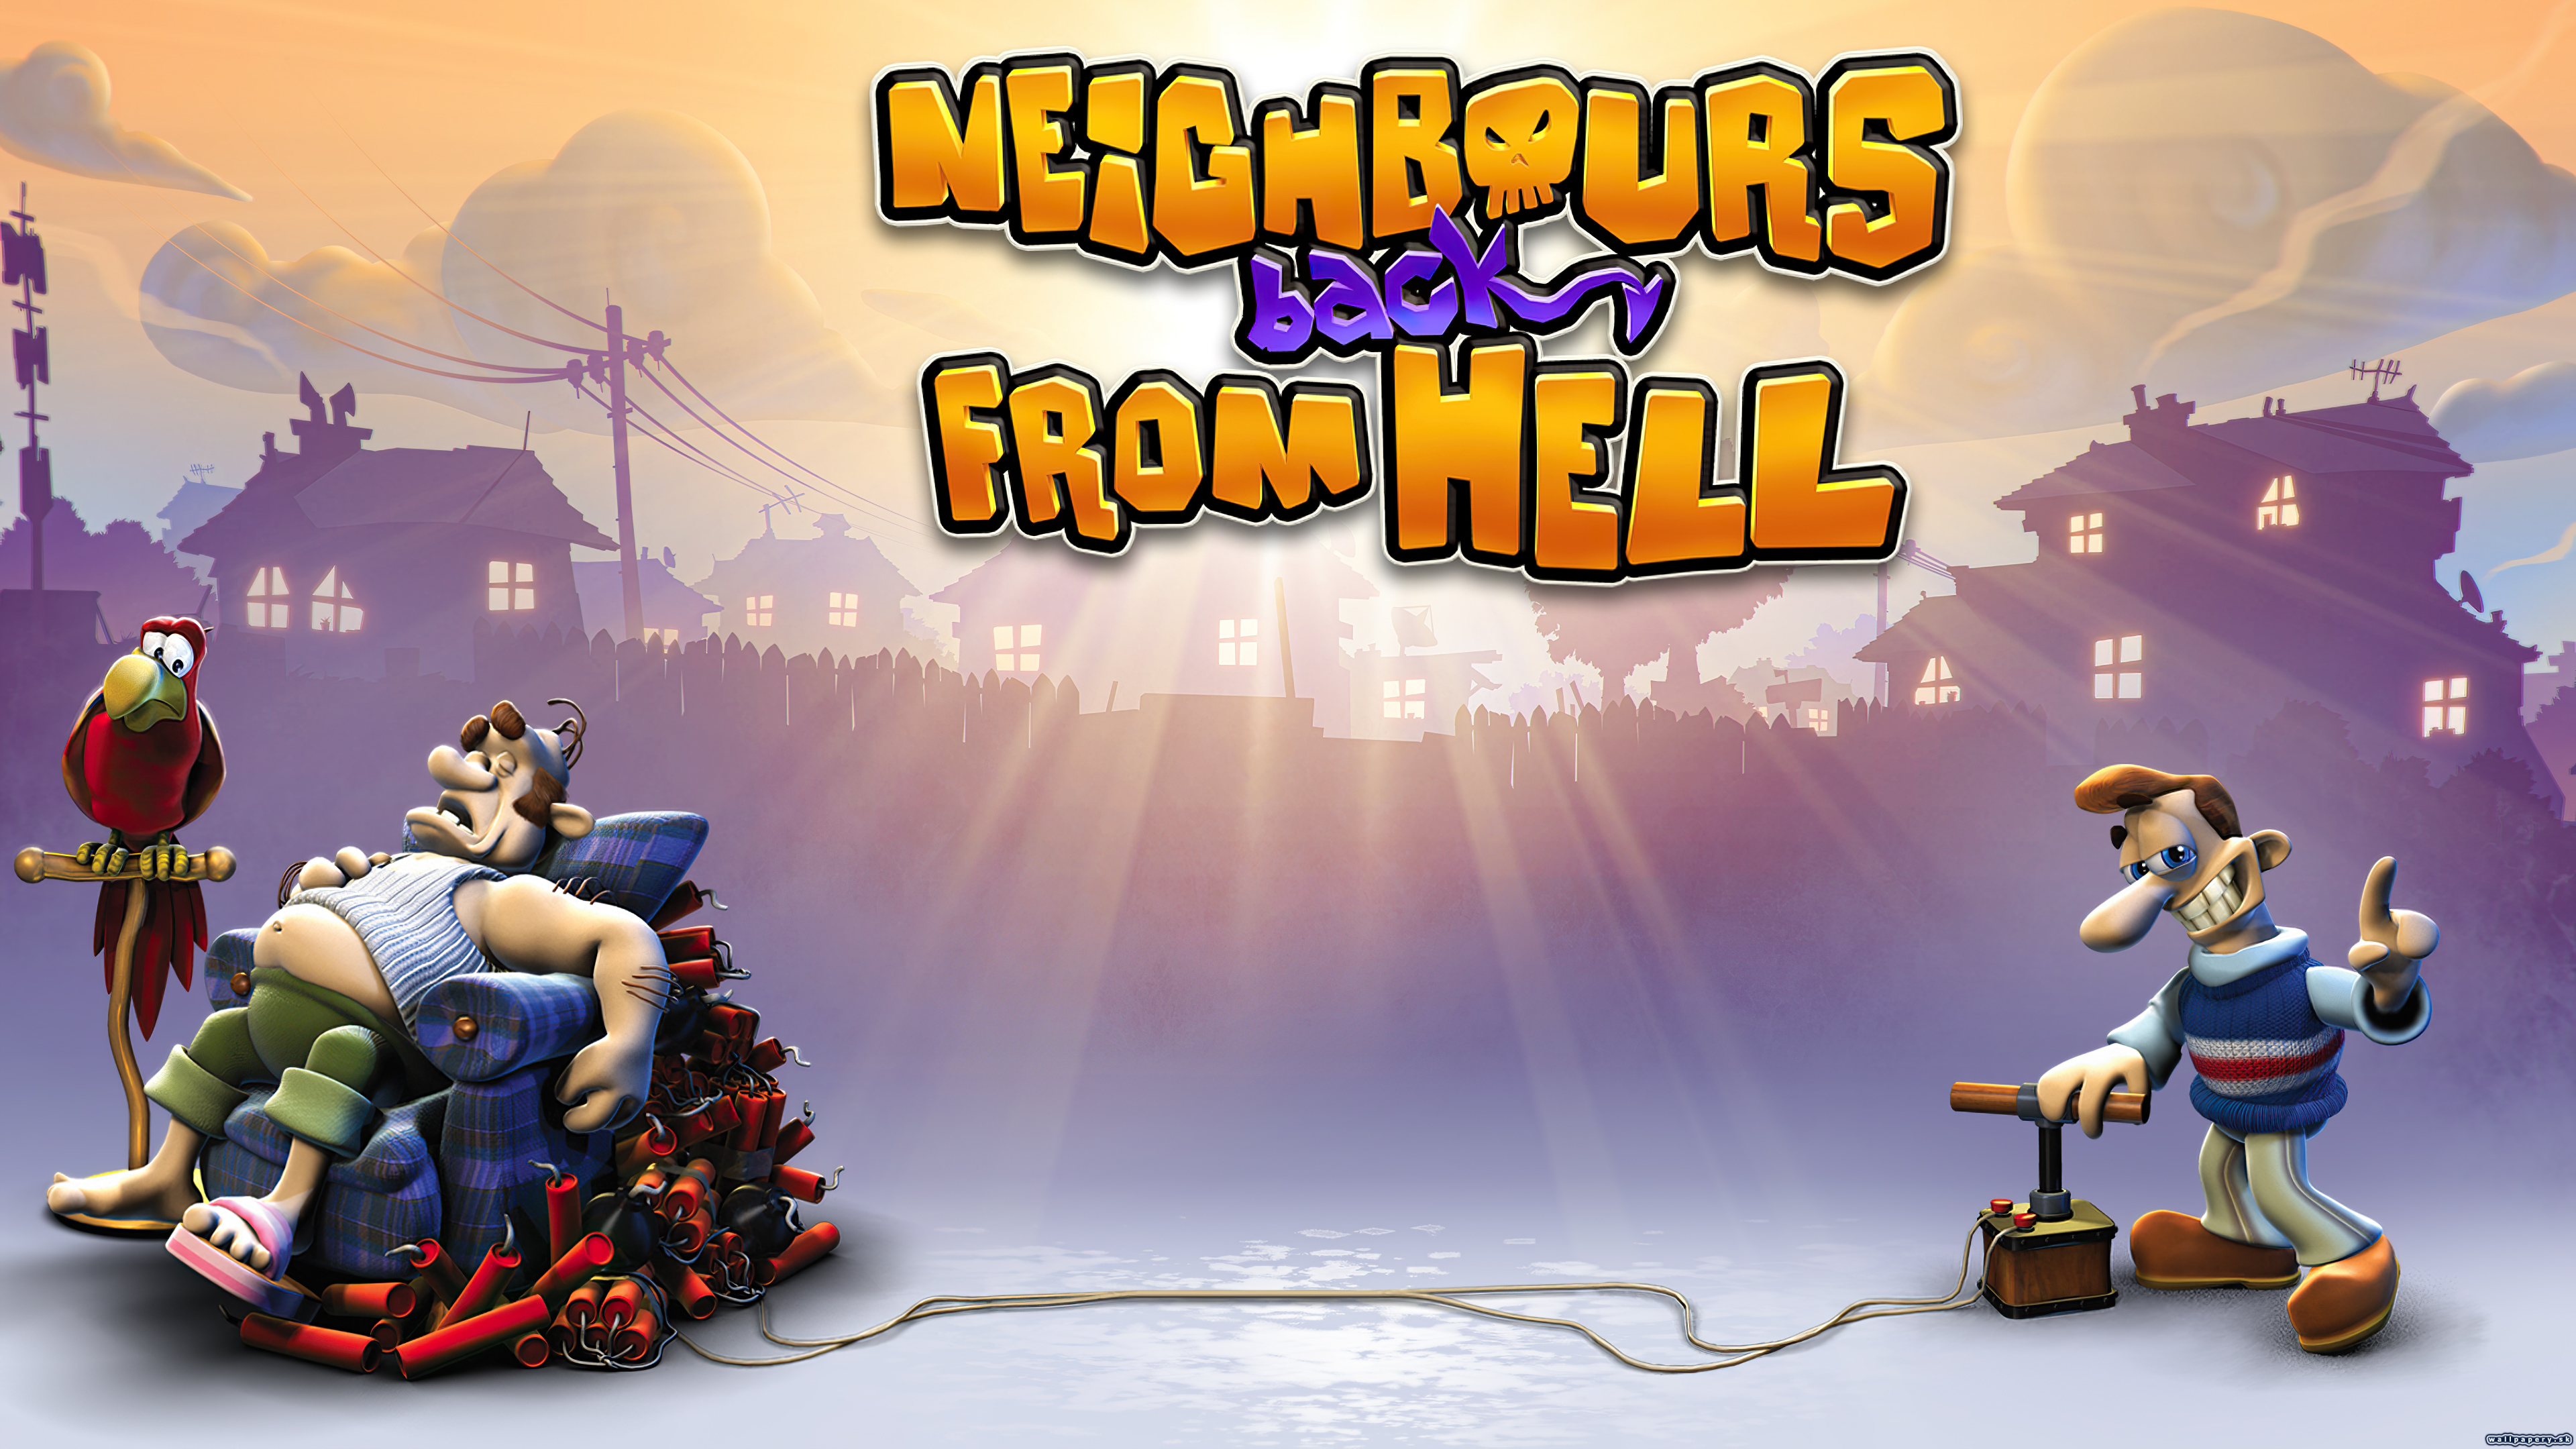 Neighbours back From Hell - wallpaper 1